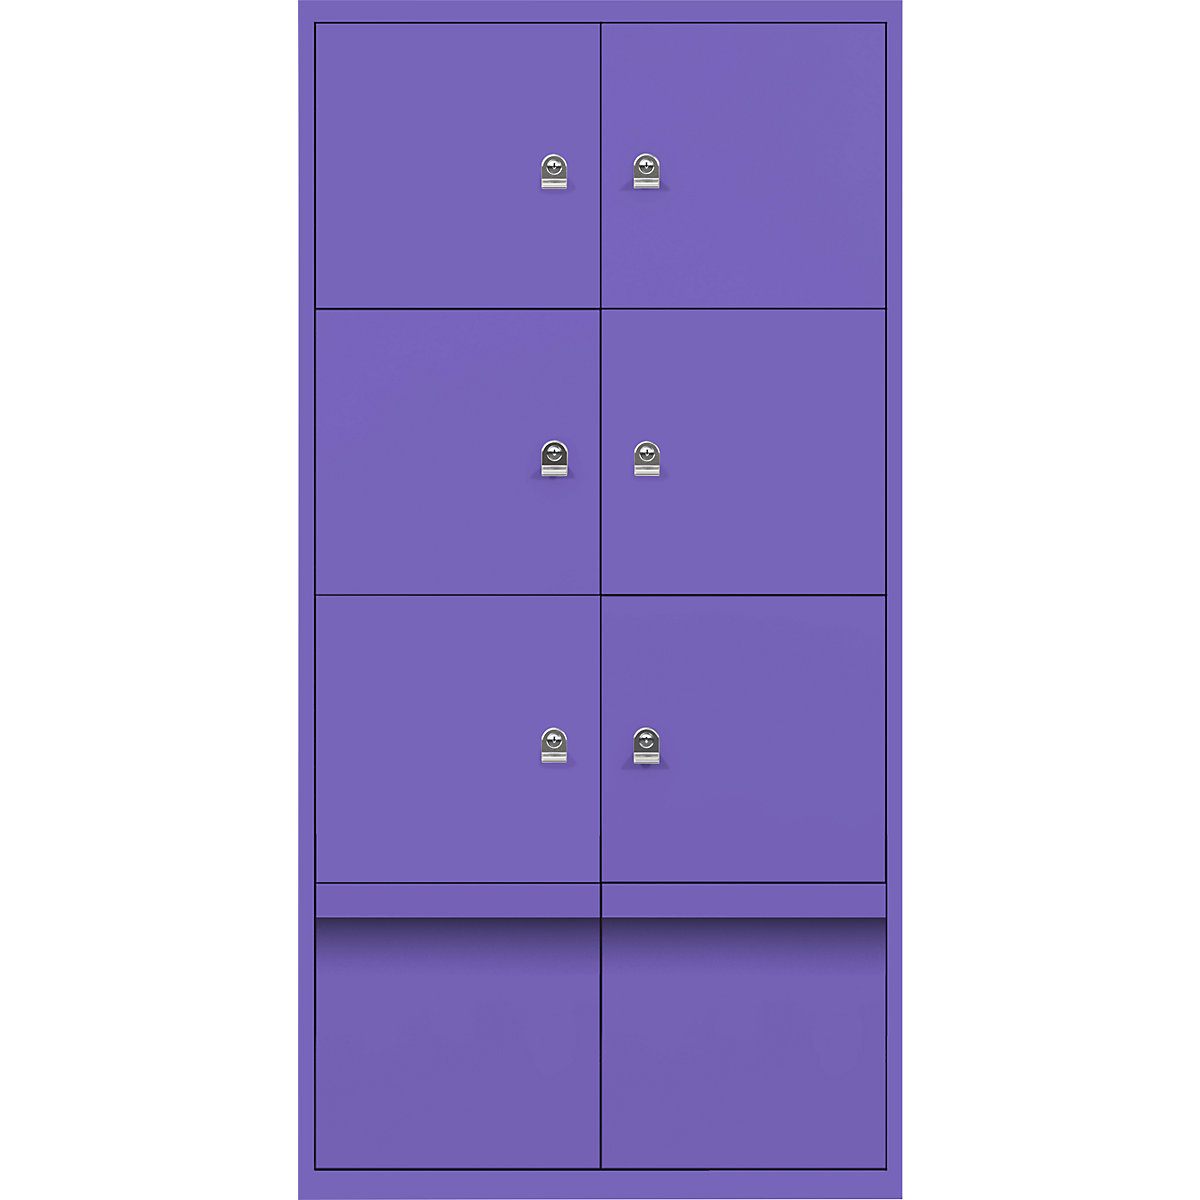 BISLEY – LateralFile™ lodge, with 6 lockable compartments and 2 drawers, height 375 mm each, parma